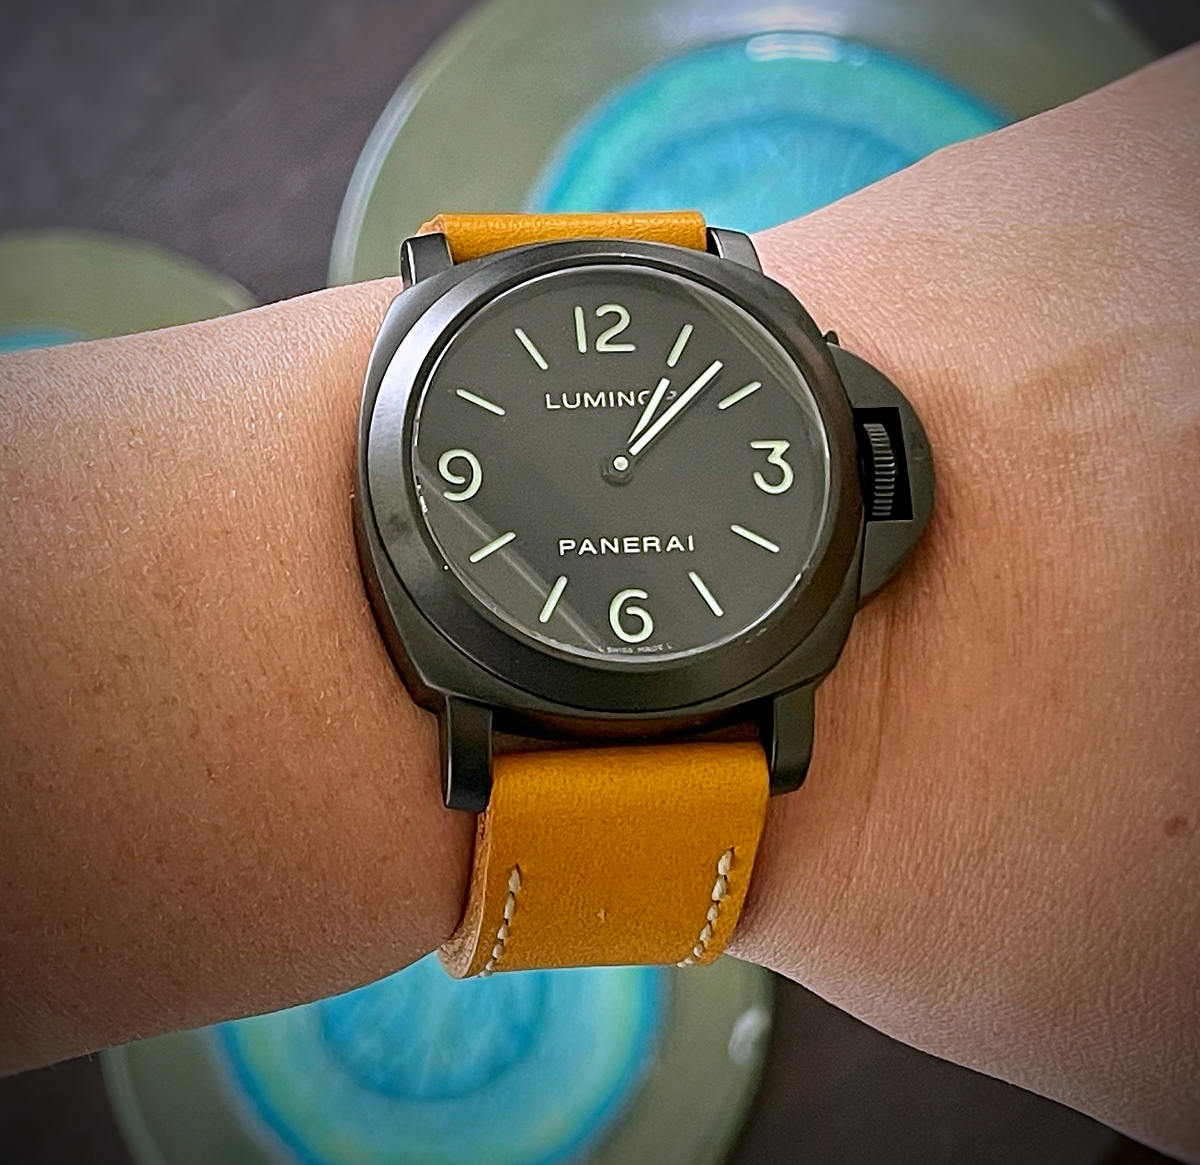 Panerai 112 custom pvd on Giallo leather with natural stitching. © Wen Gagne